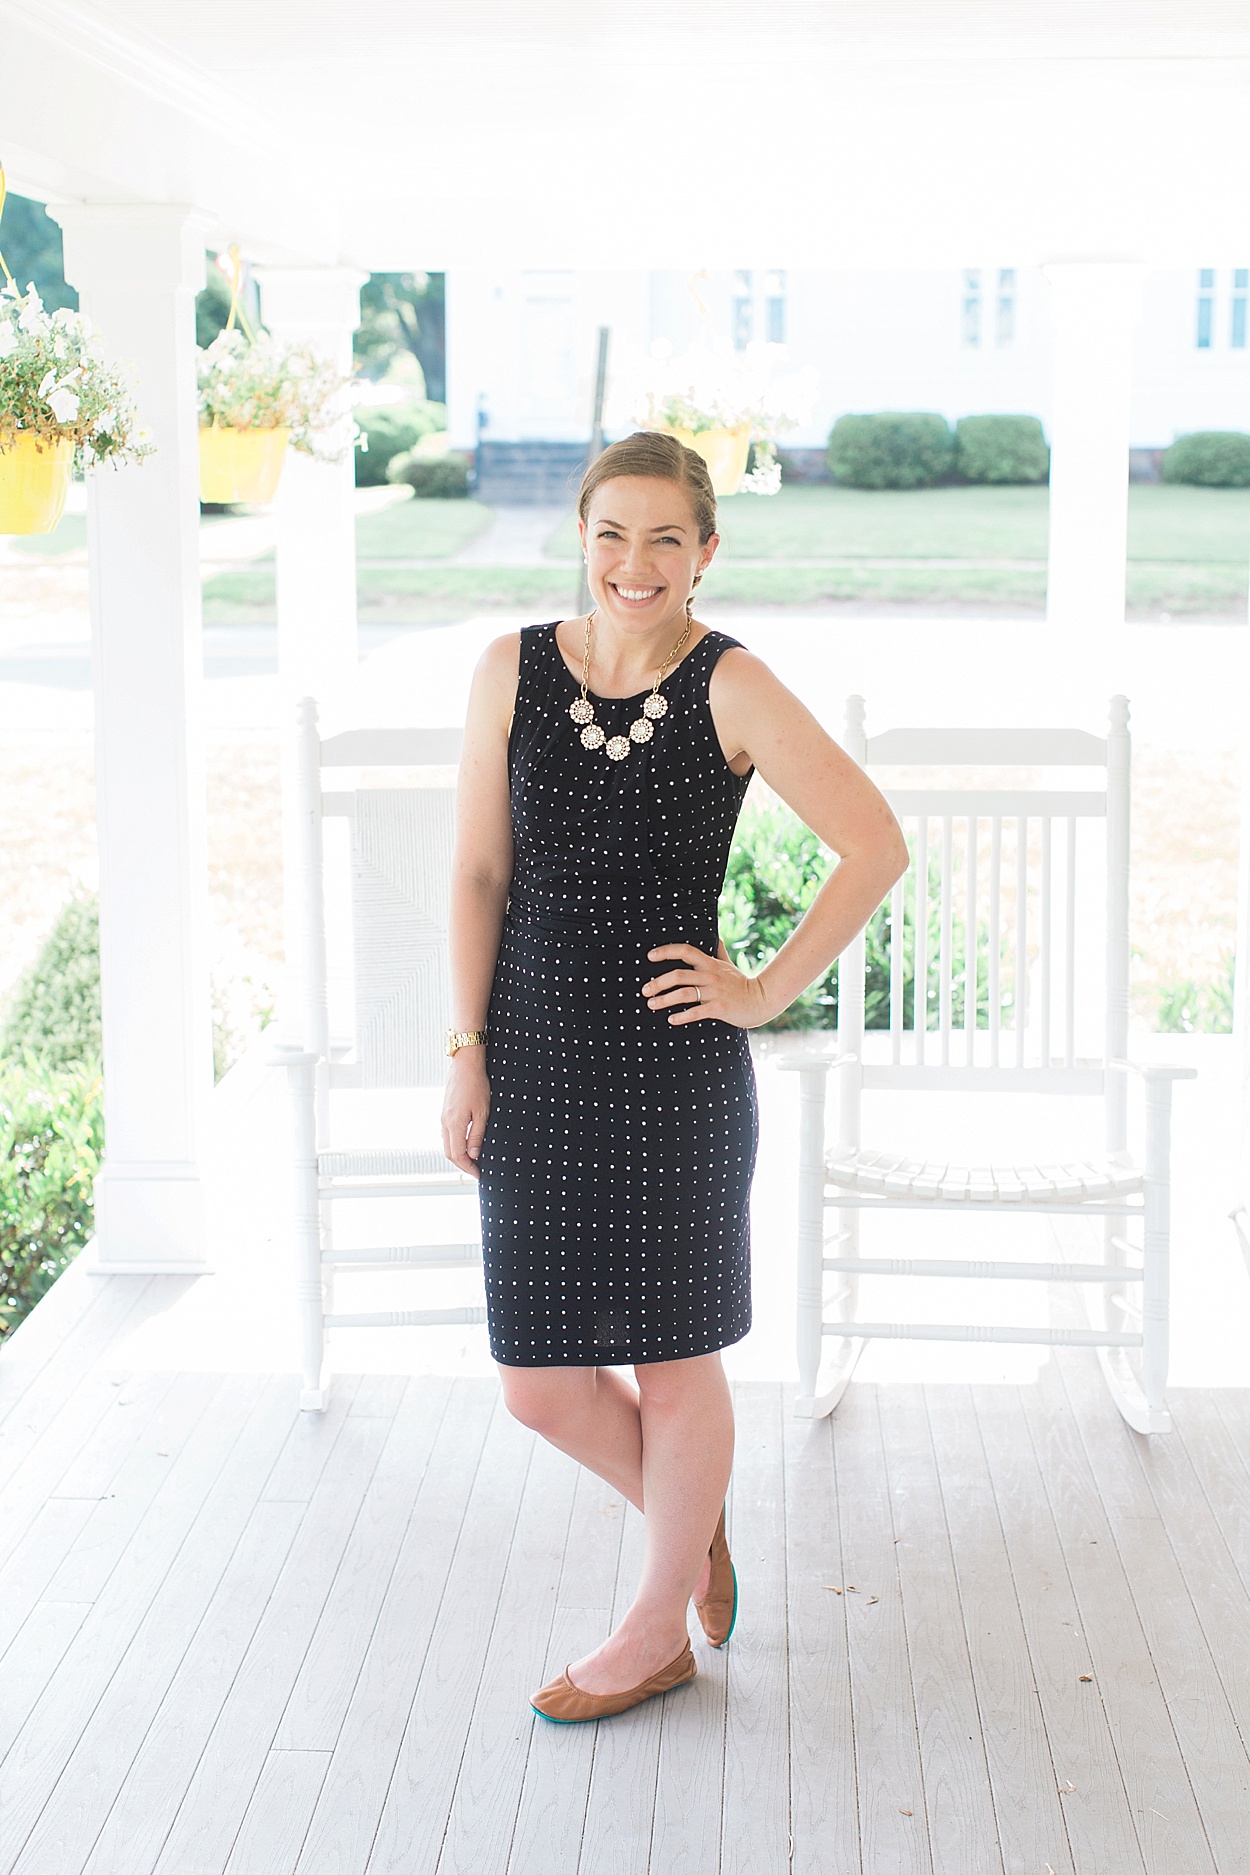 Photog Friday- What do I wear to weddings? - Abby Grace Blog